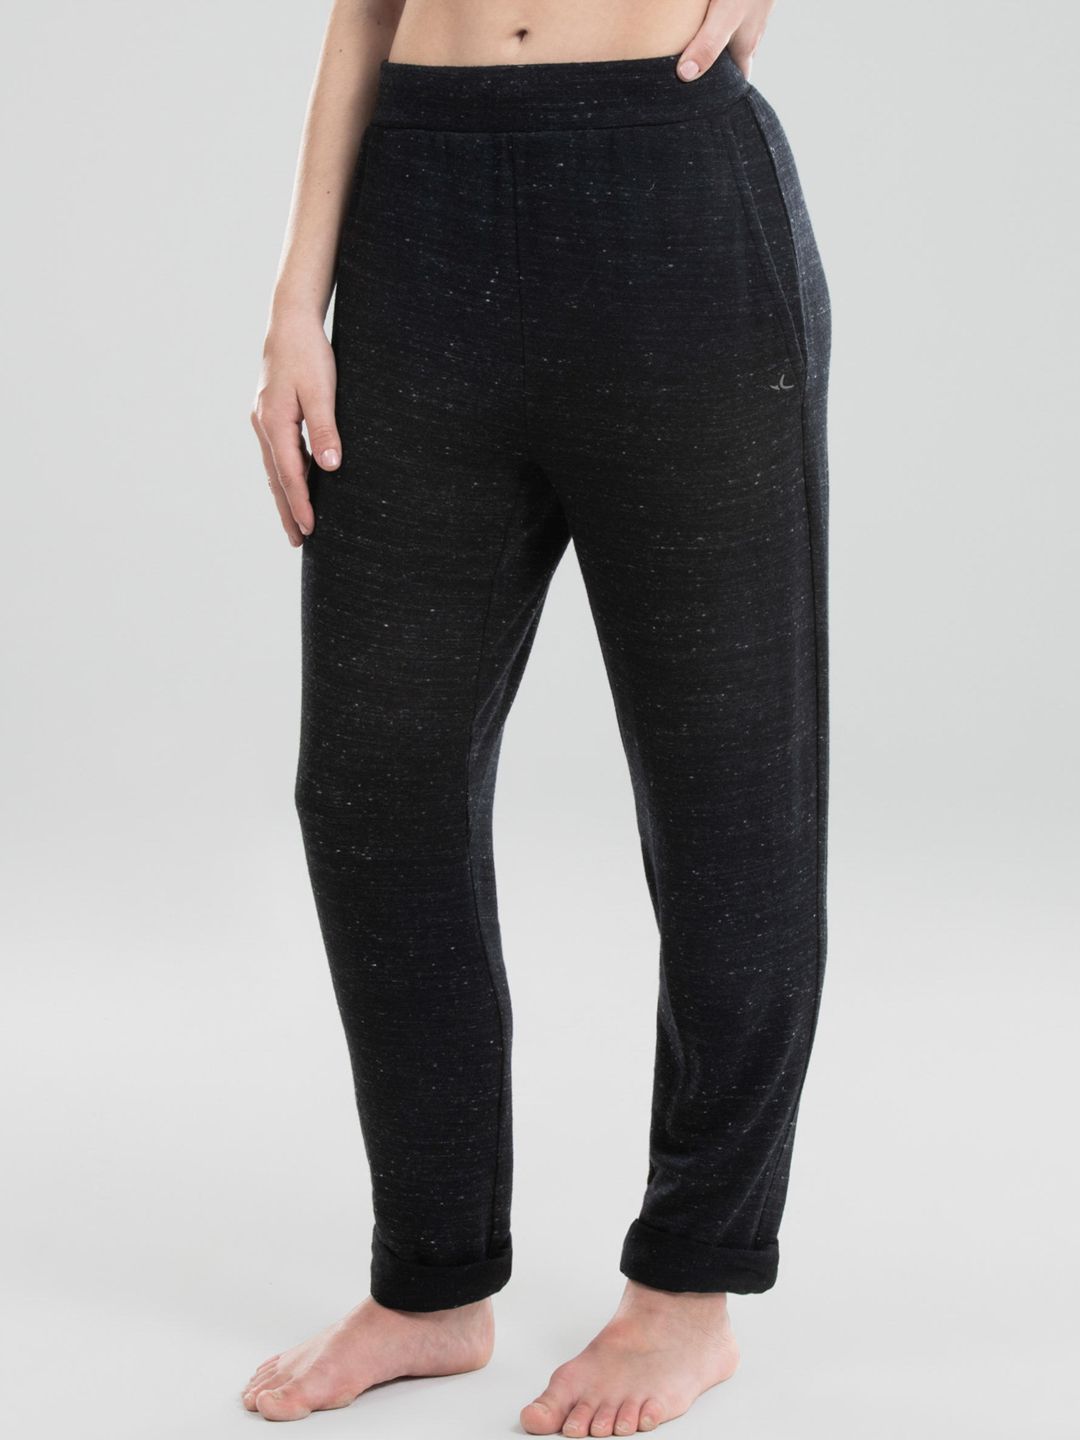 Domyos By Decathlon Women Black Straight Fit High-Waist Track Pants Price in India